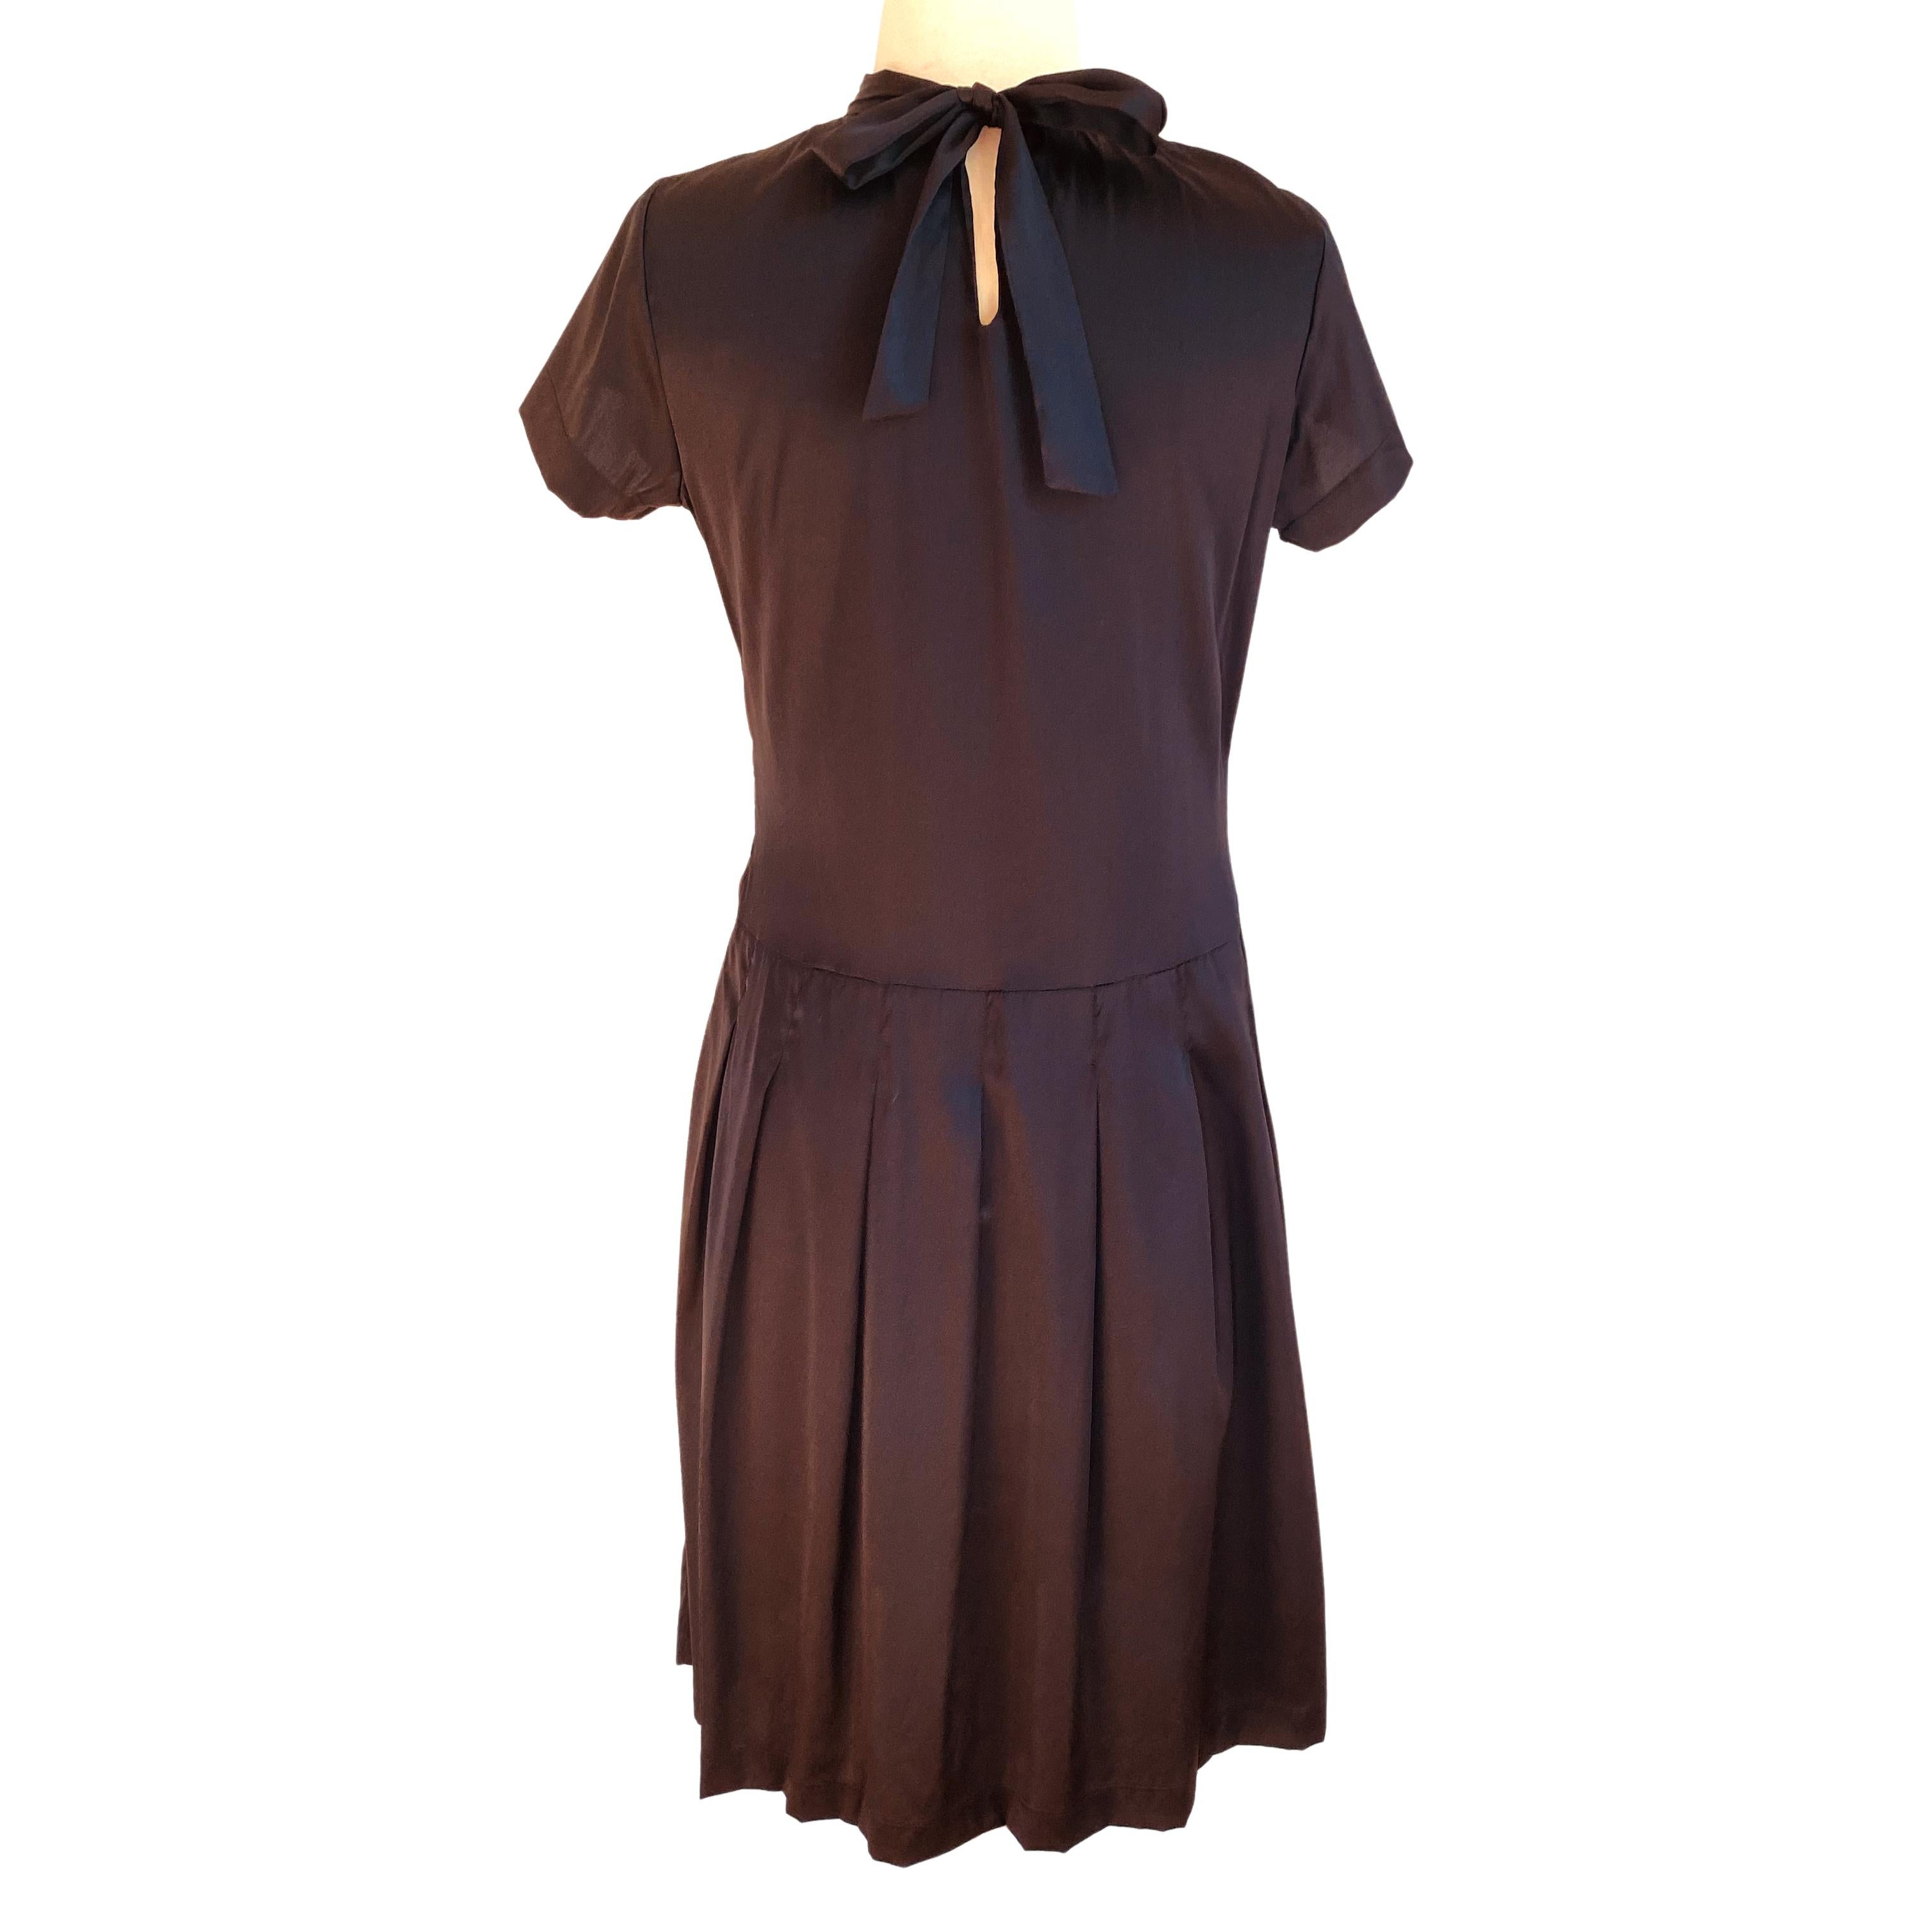 Little bon-chic-bon-genre LBD with plenty of details: low waist, stiched-pleats, neck shirring and back tie.
Fabric: 100% silk satin  
Invisible side zipper, plus self-tie at back neck for a perfect fit
Stitched-down box pleated skirt.

FLORA KUNG